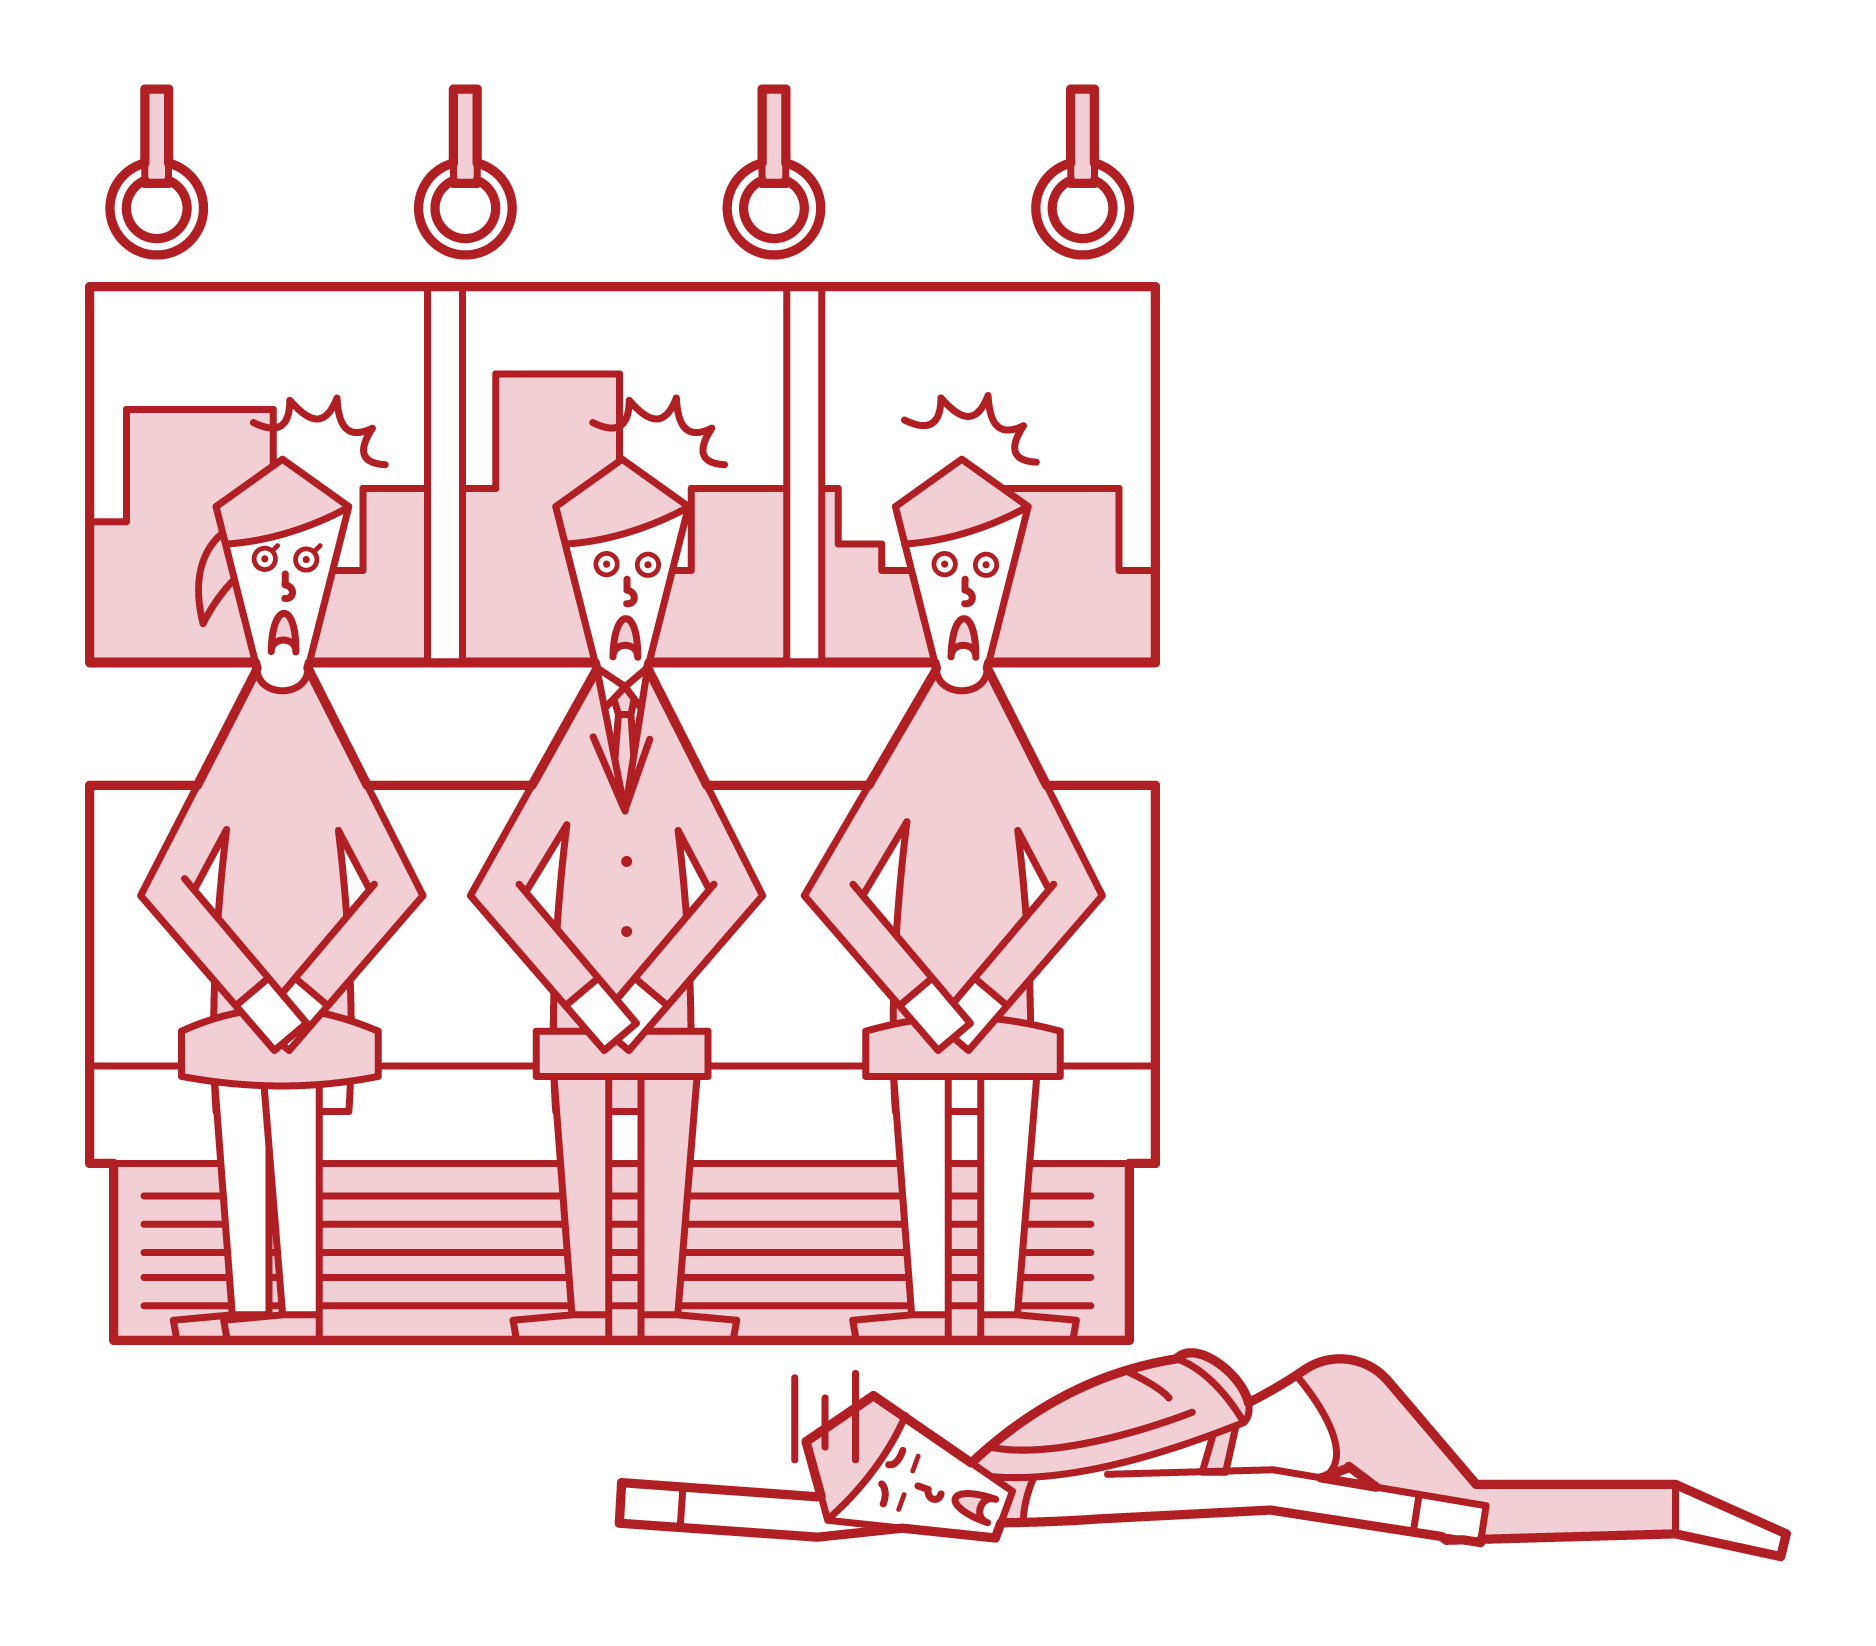 Illustration of a man collapsing on a train